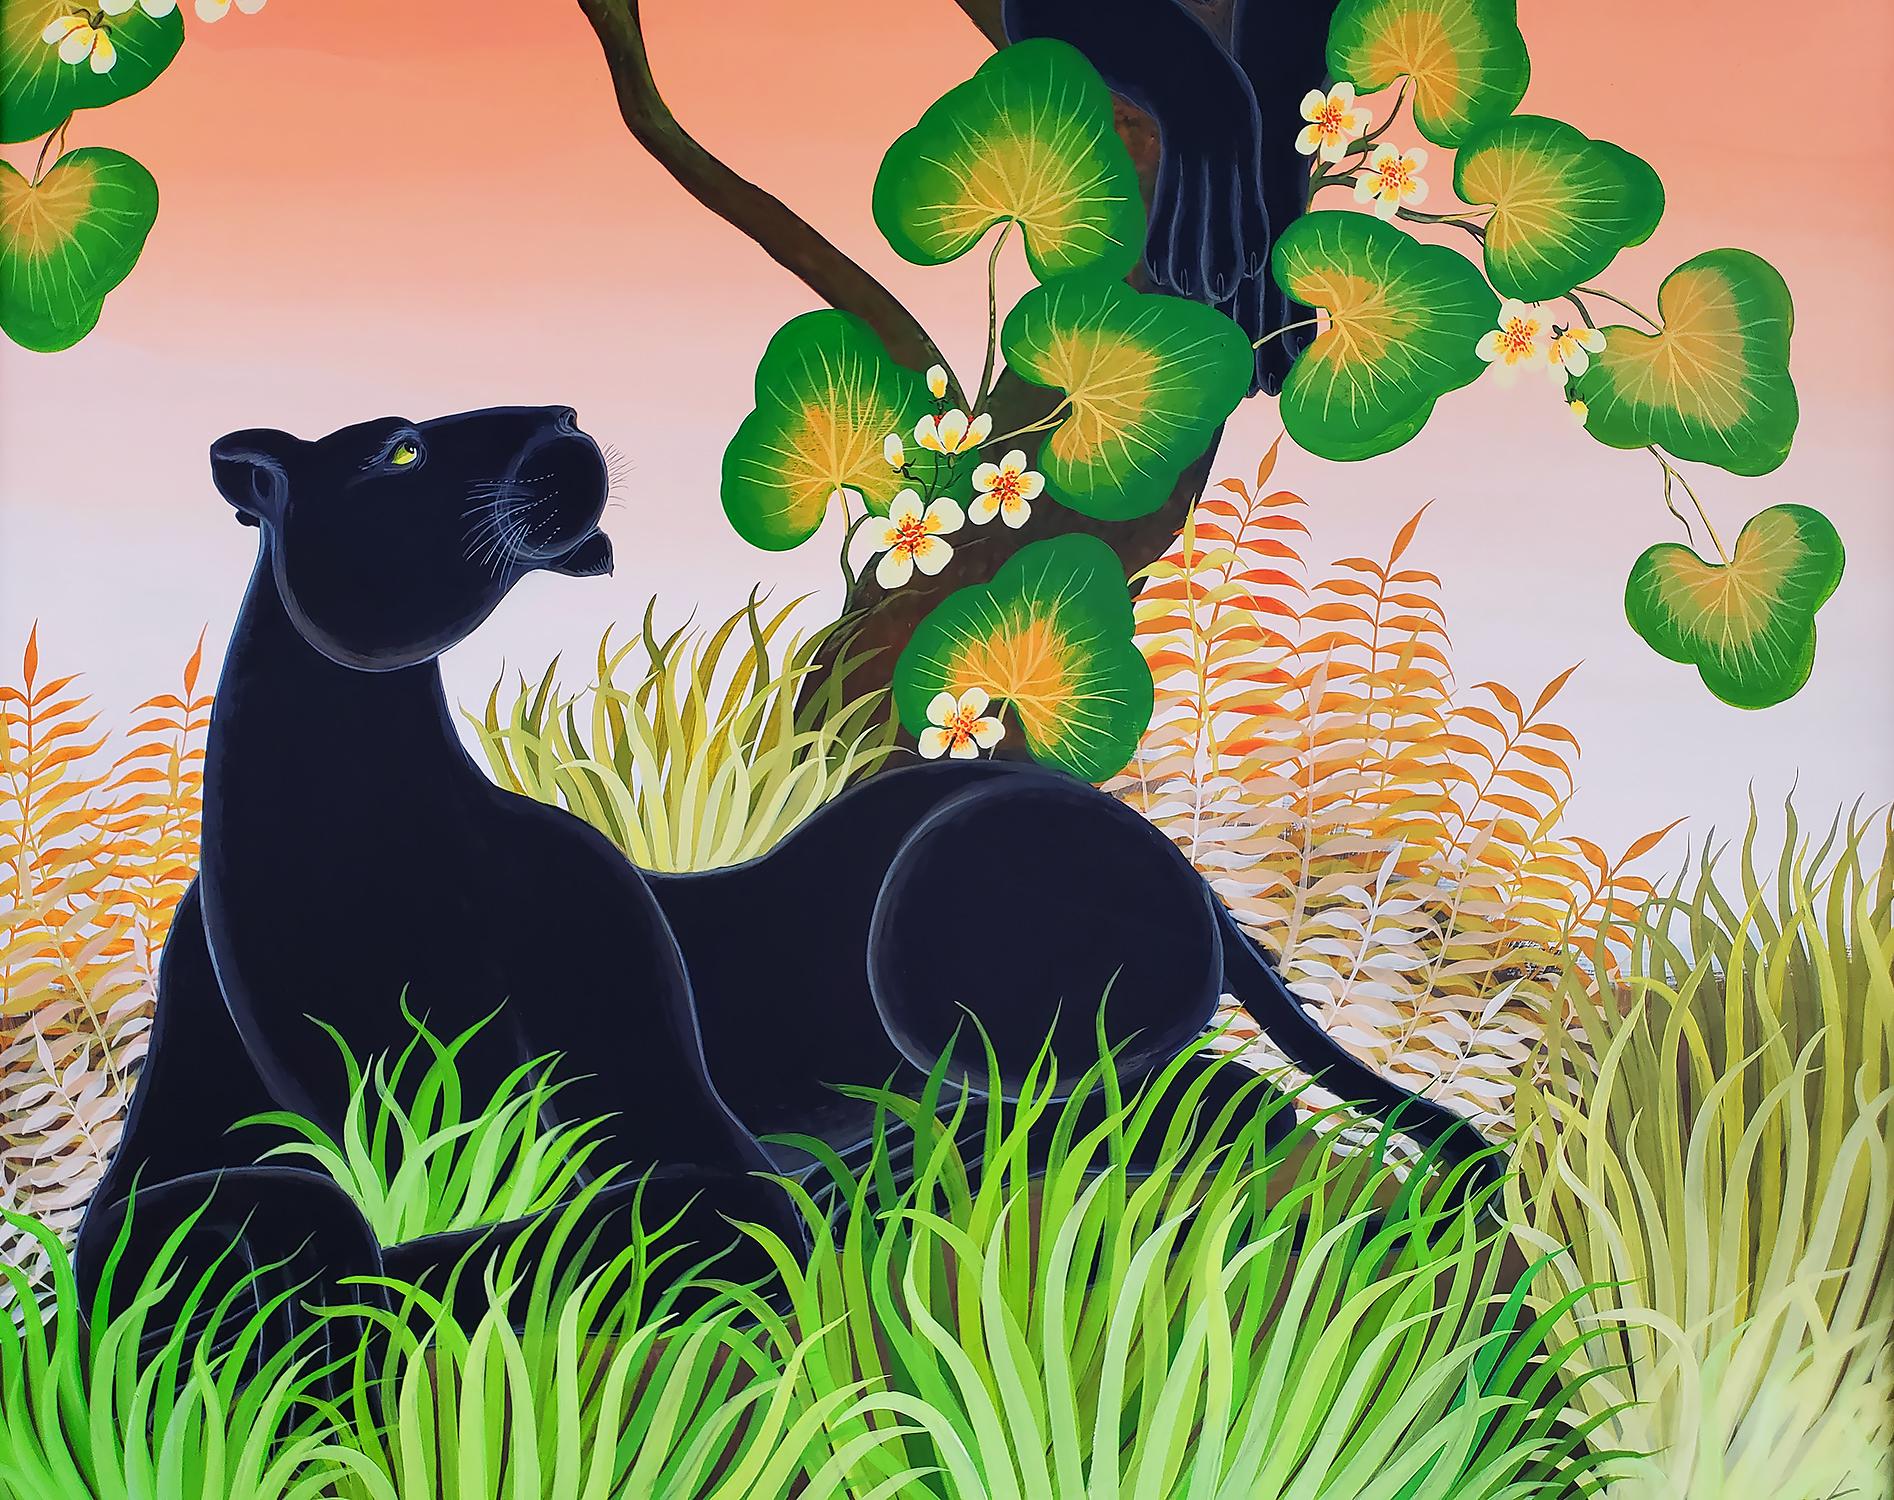 Black Panthers in a tree with a peach sky - Black Cats - Orange Landscape Painting by Gustavo Novoa